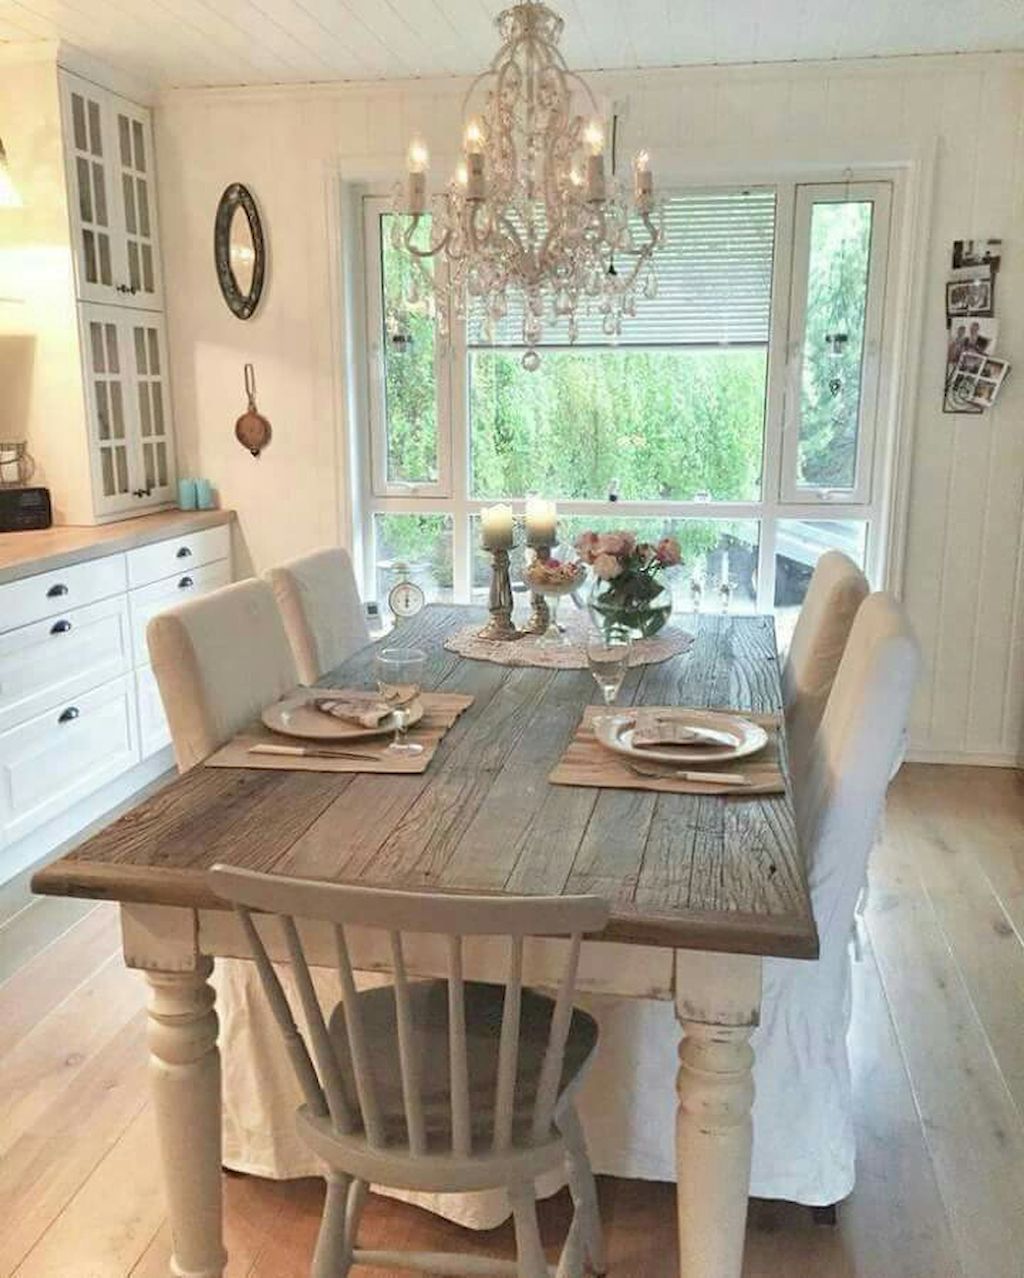 65 Timeless Farmhouse Dining Room Table and Decorating Ideas - Page 60